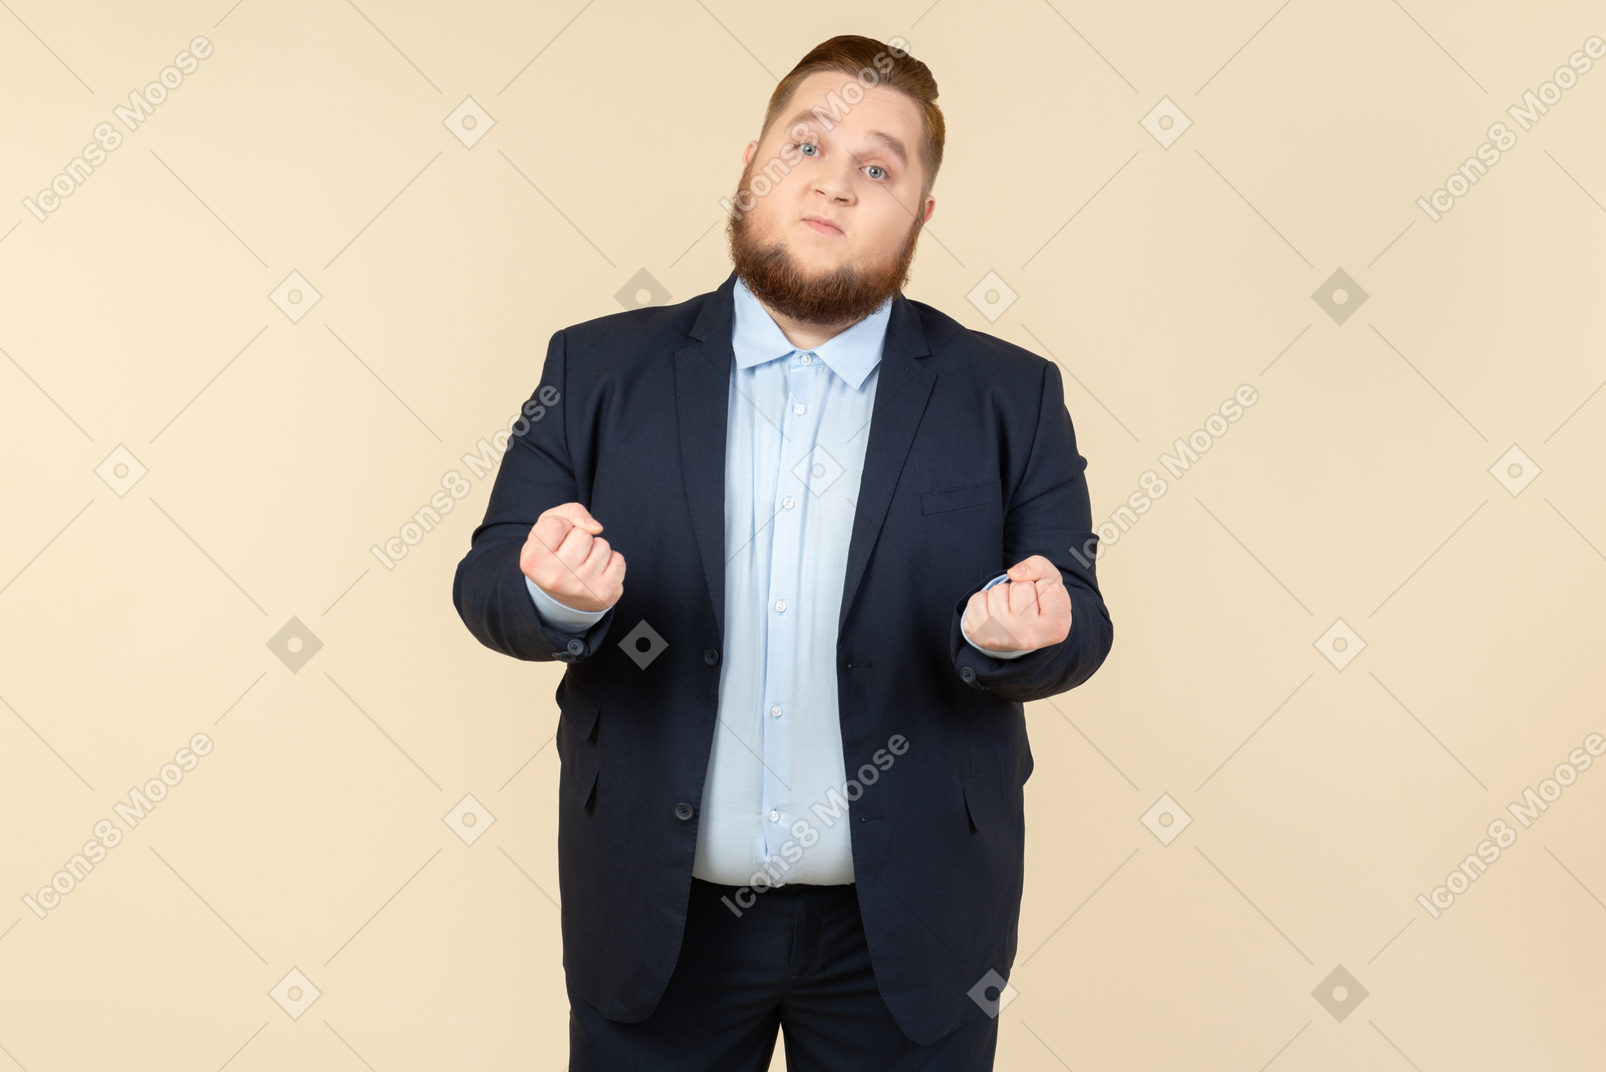 Mad looking young overweight man in suit holding fists clenched